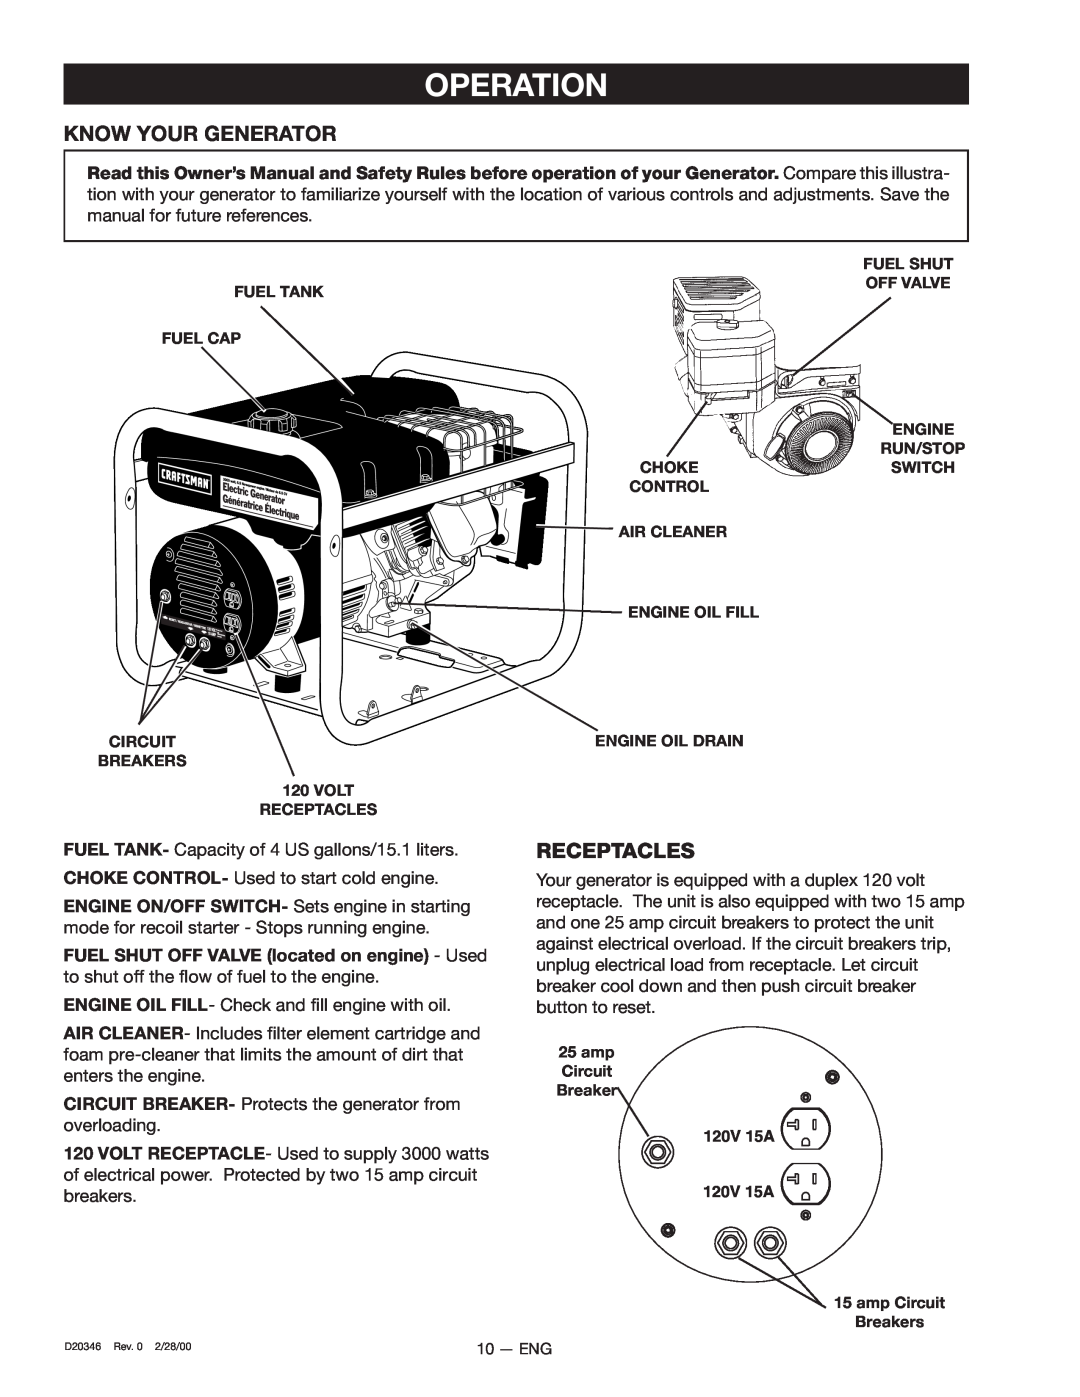 Craftsman 919.670031, D20346 owner manual Operation, Know Your Generator, Receptacles 